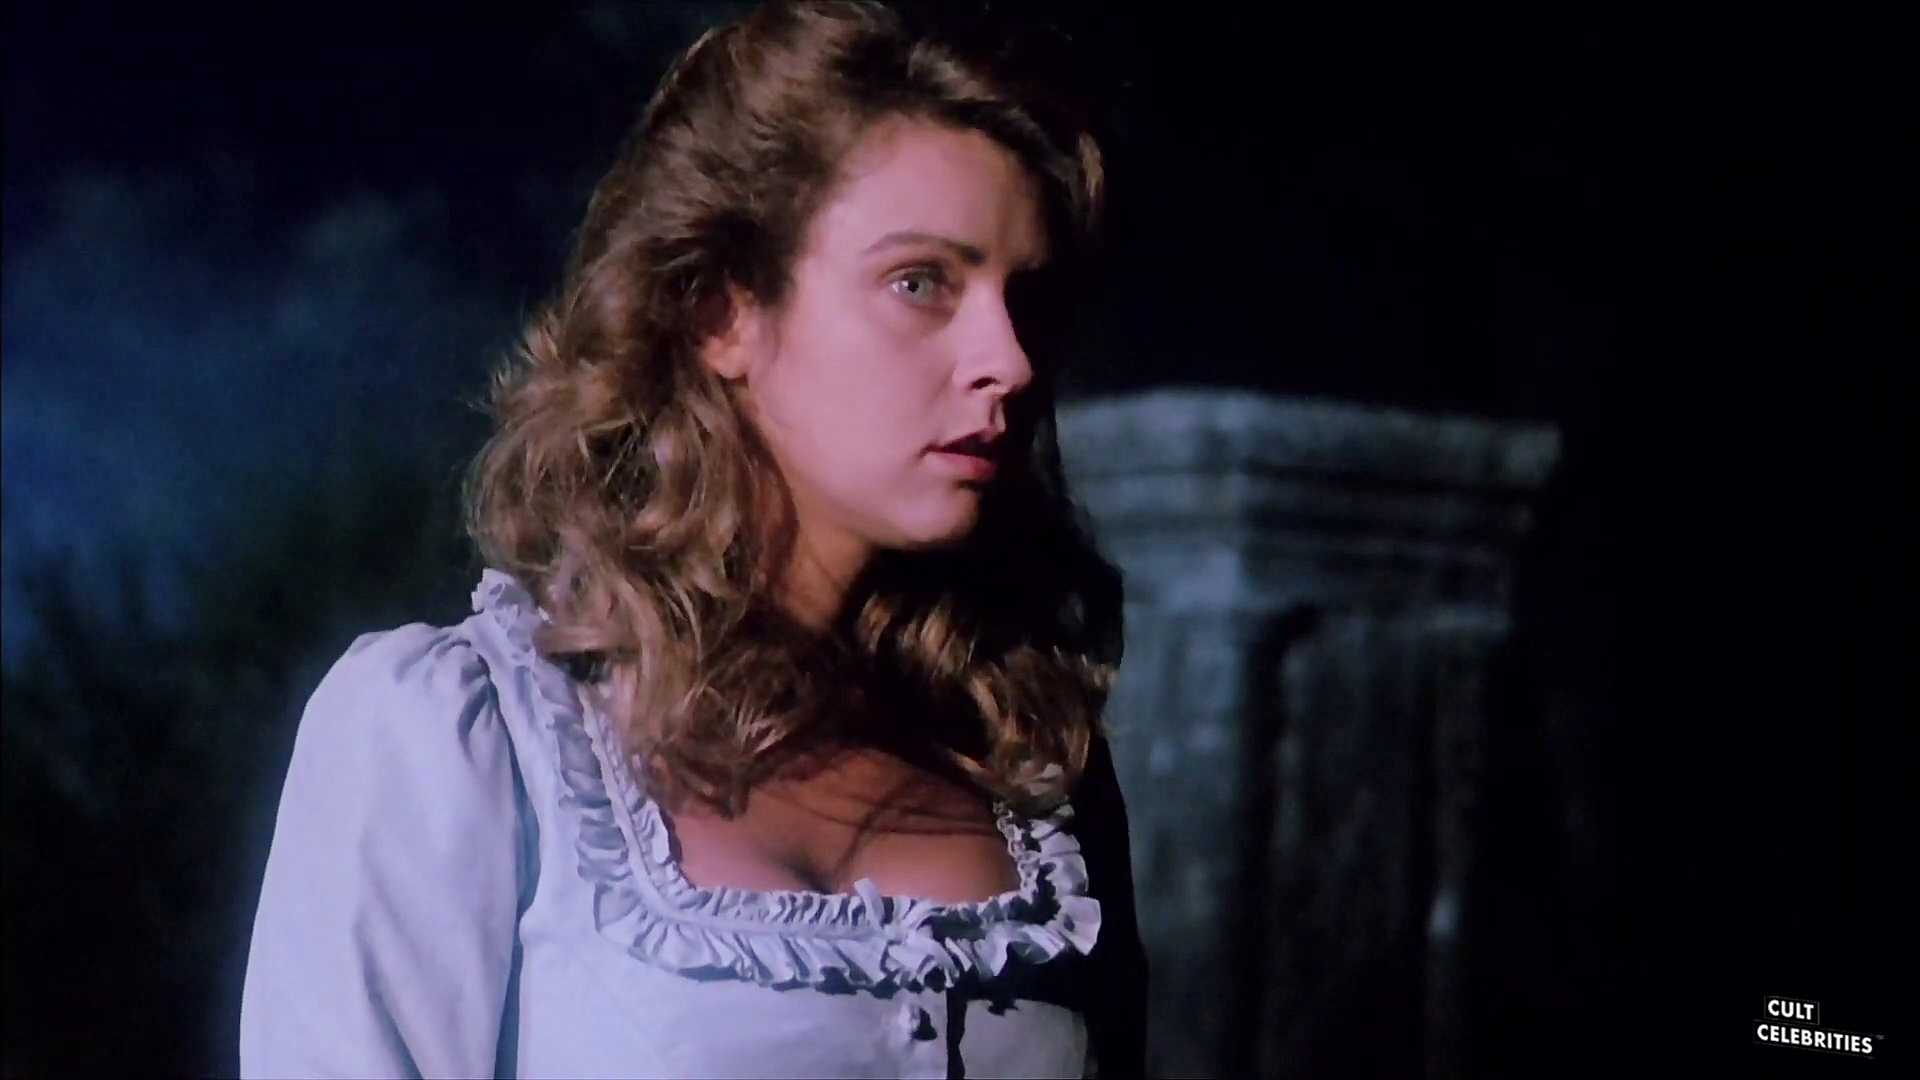 Gail Thackray (also known as Gail Harris) in The Haunting of Morella with Lana Clarkson, Debbie Dutch and Maria Ford.